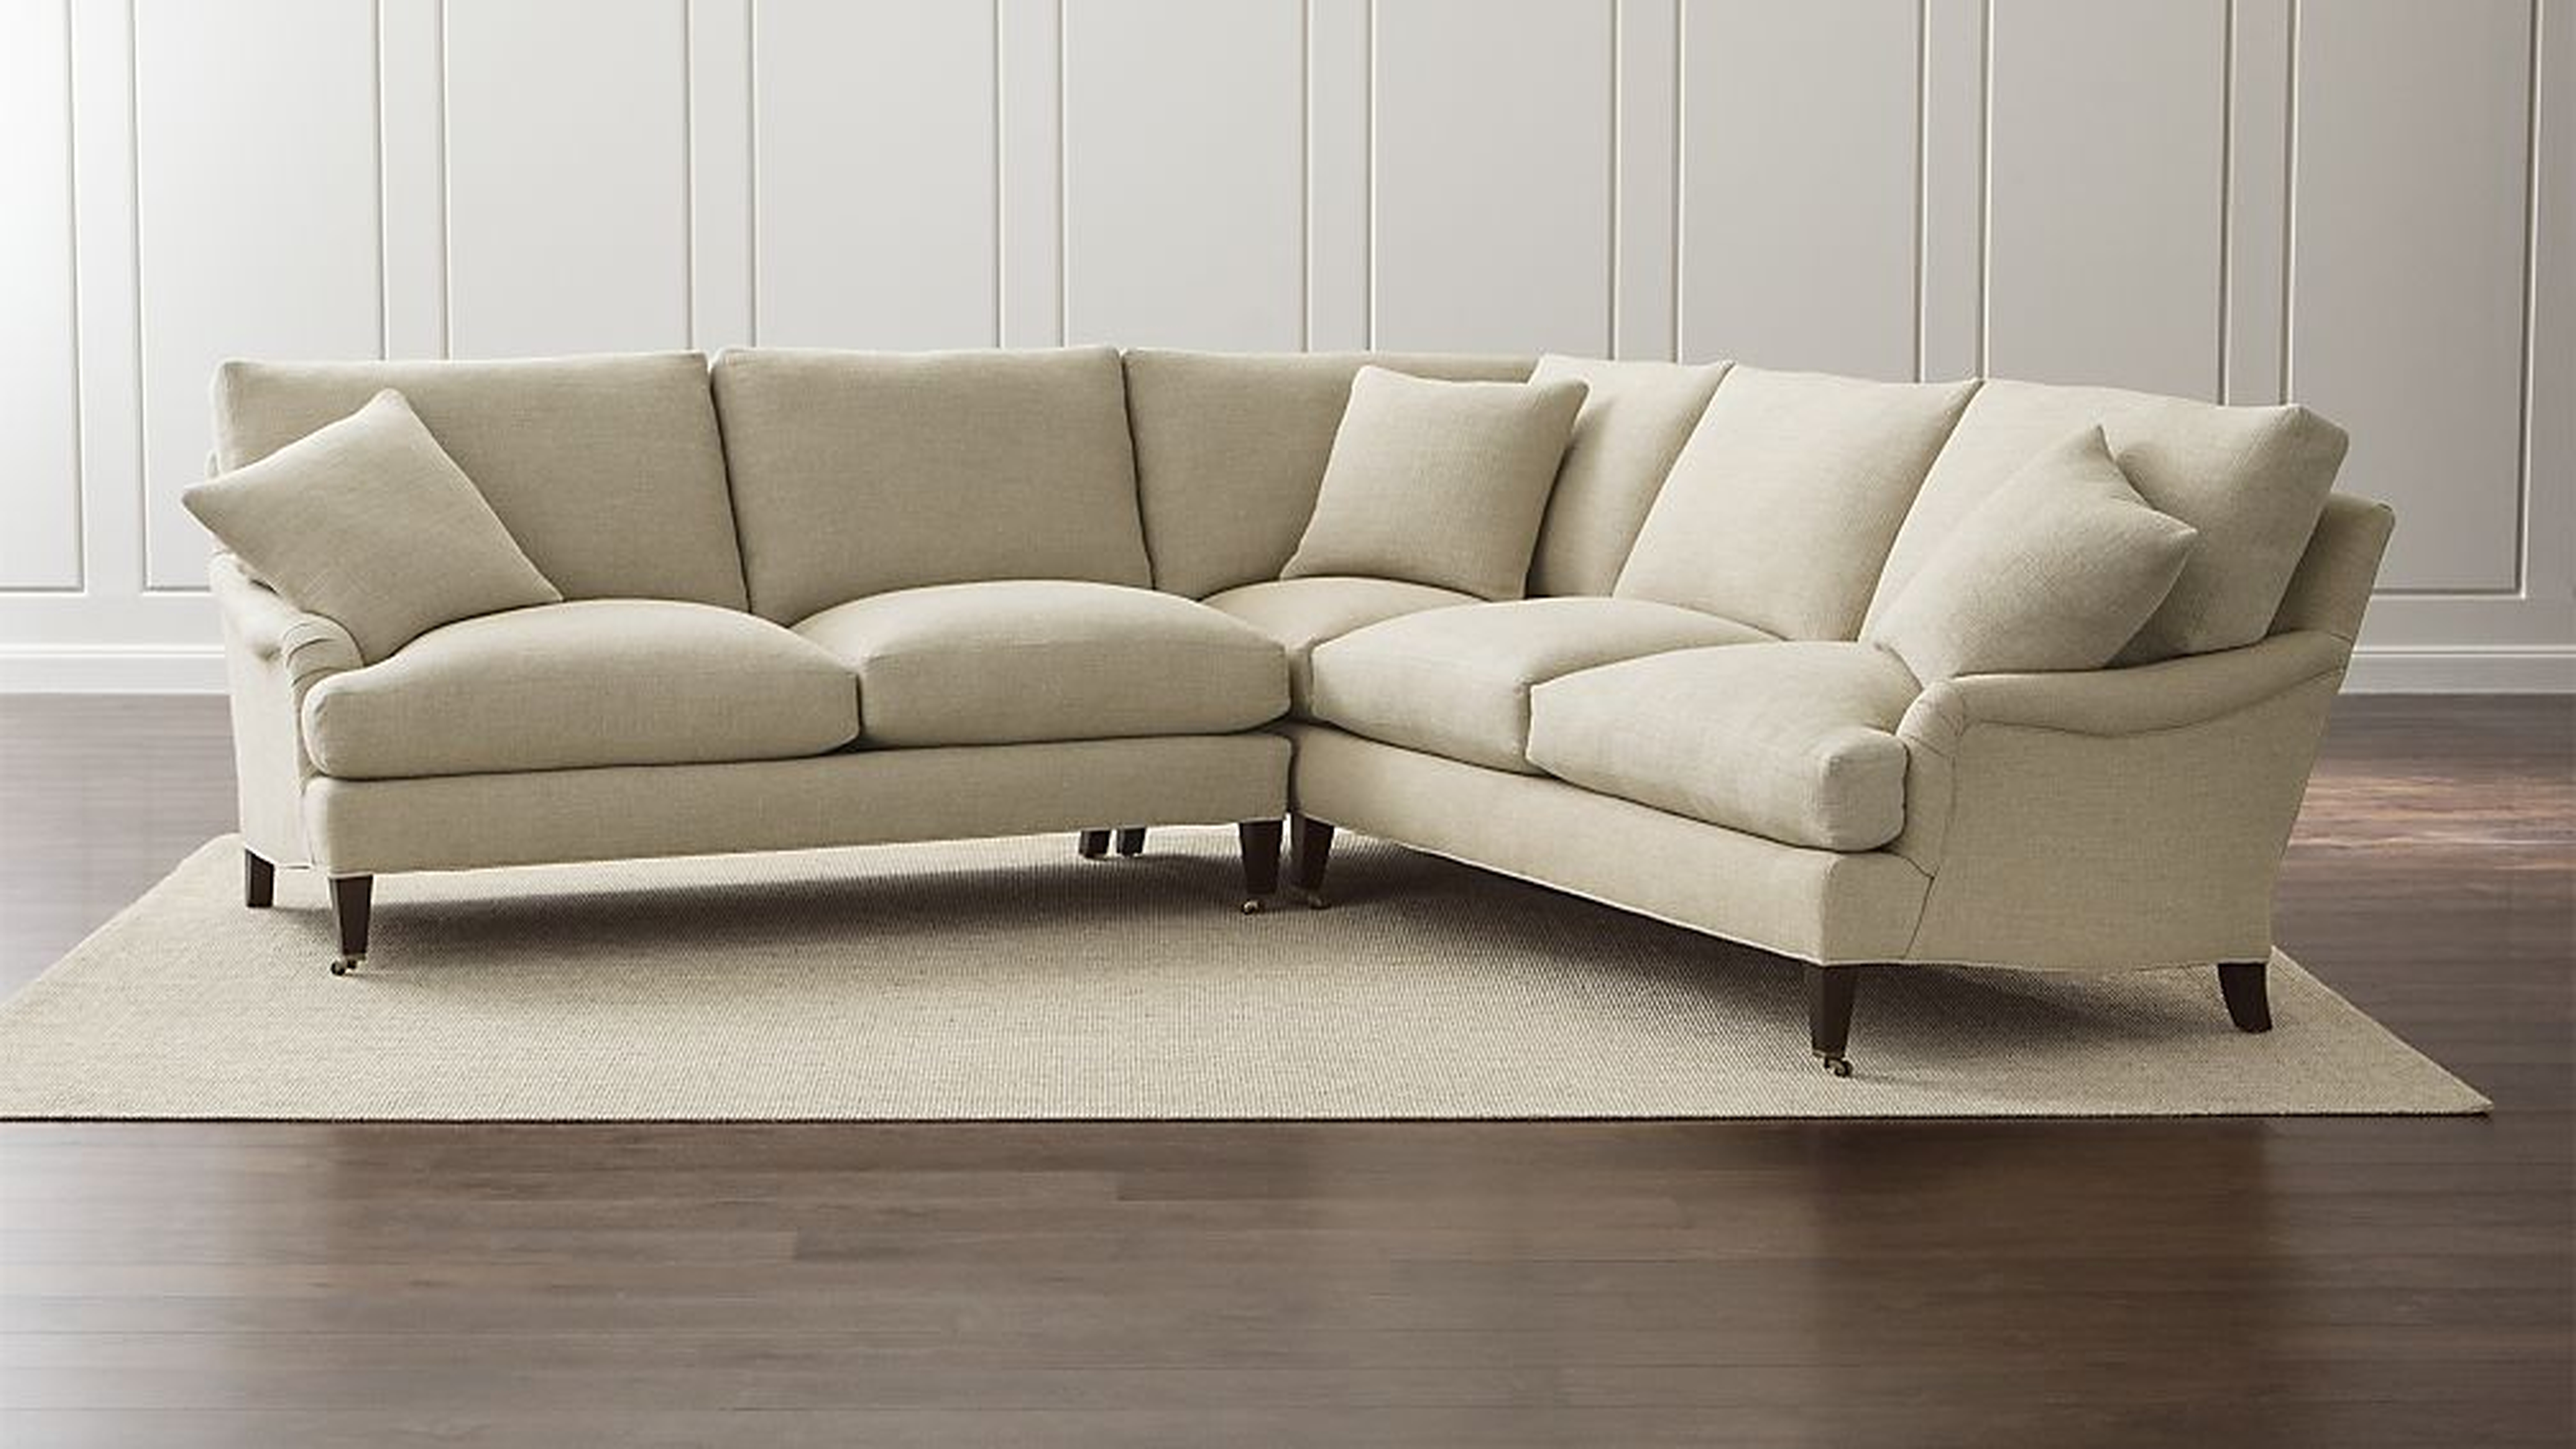 Essex 2-Piece Sectional Sofa with Casters [fabric : Ruffin] - Crate and Barrel